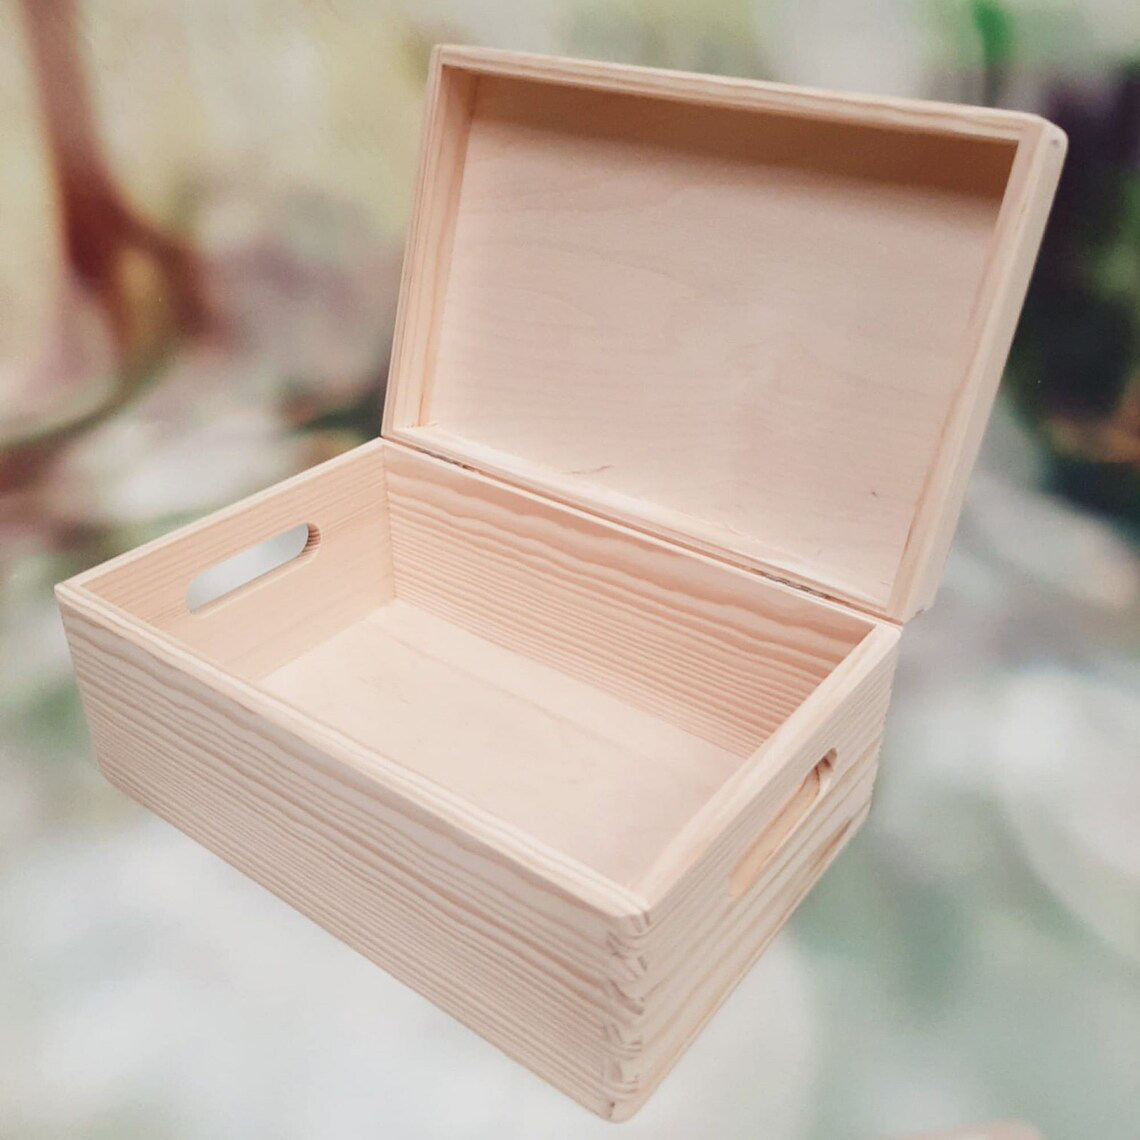 Plain Wooden Box With Or Without Handles